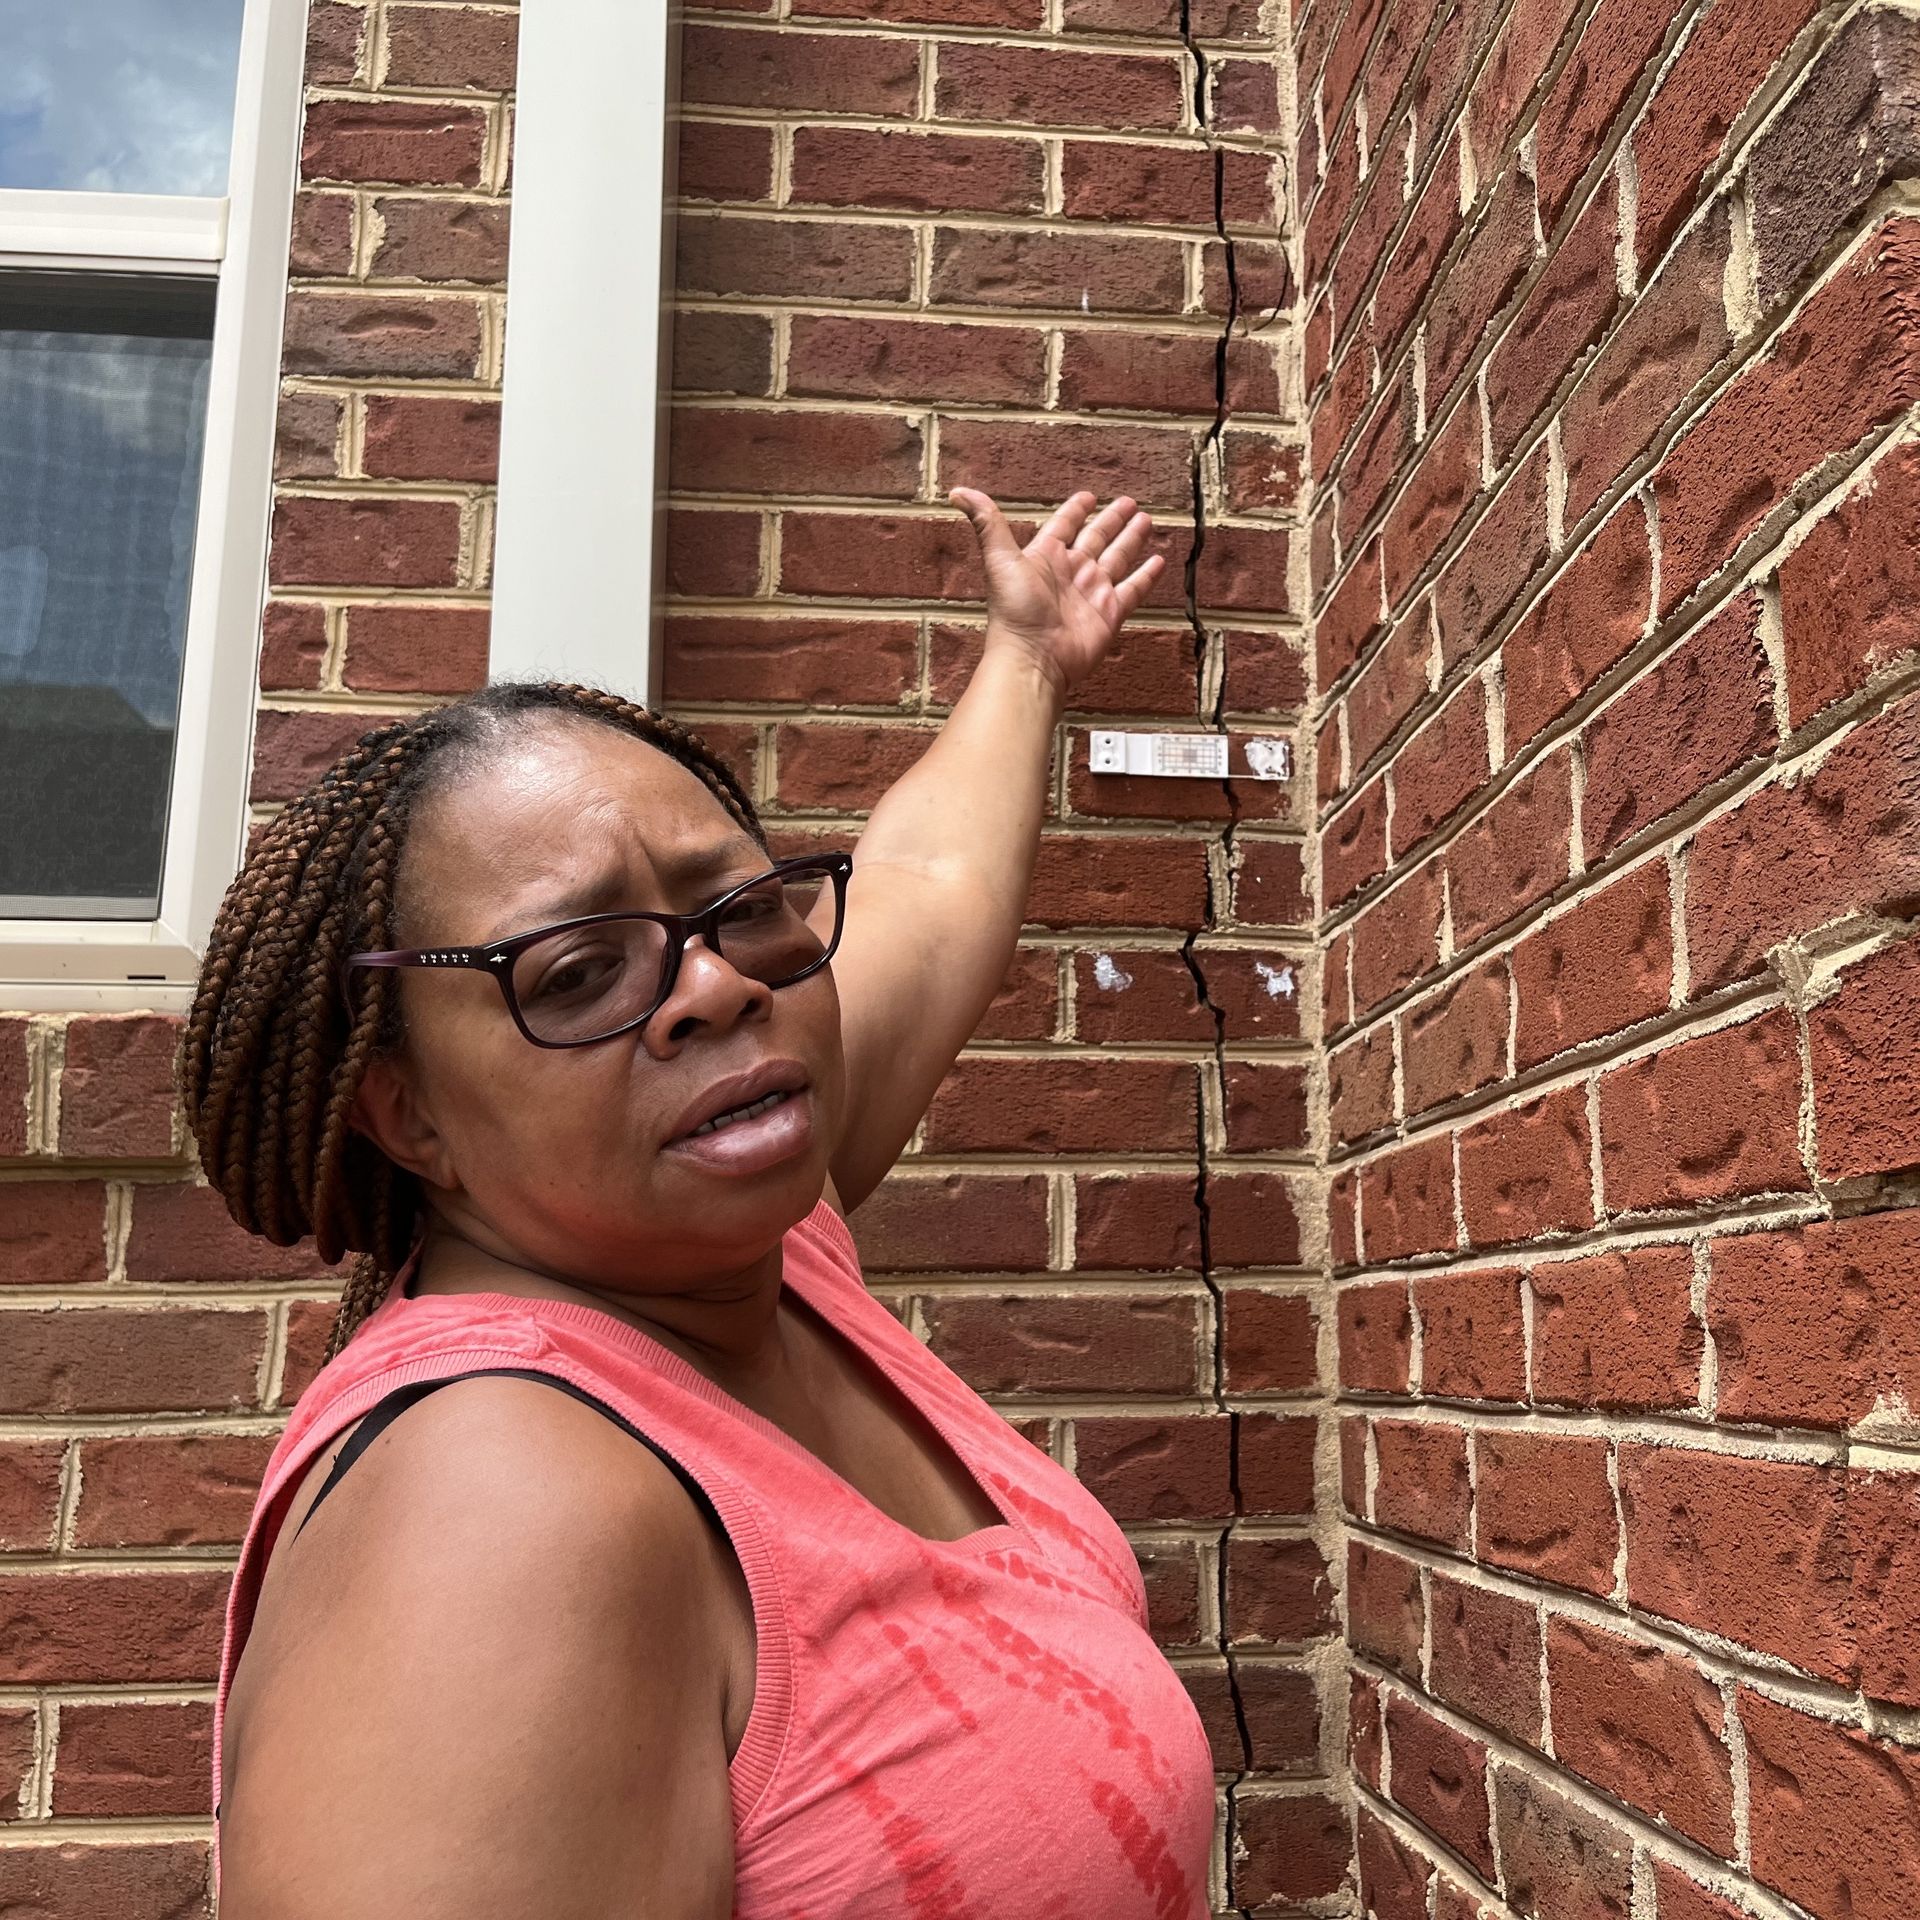 Homeowner points to a crack in the brick facade of building